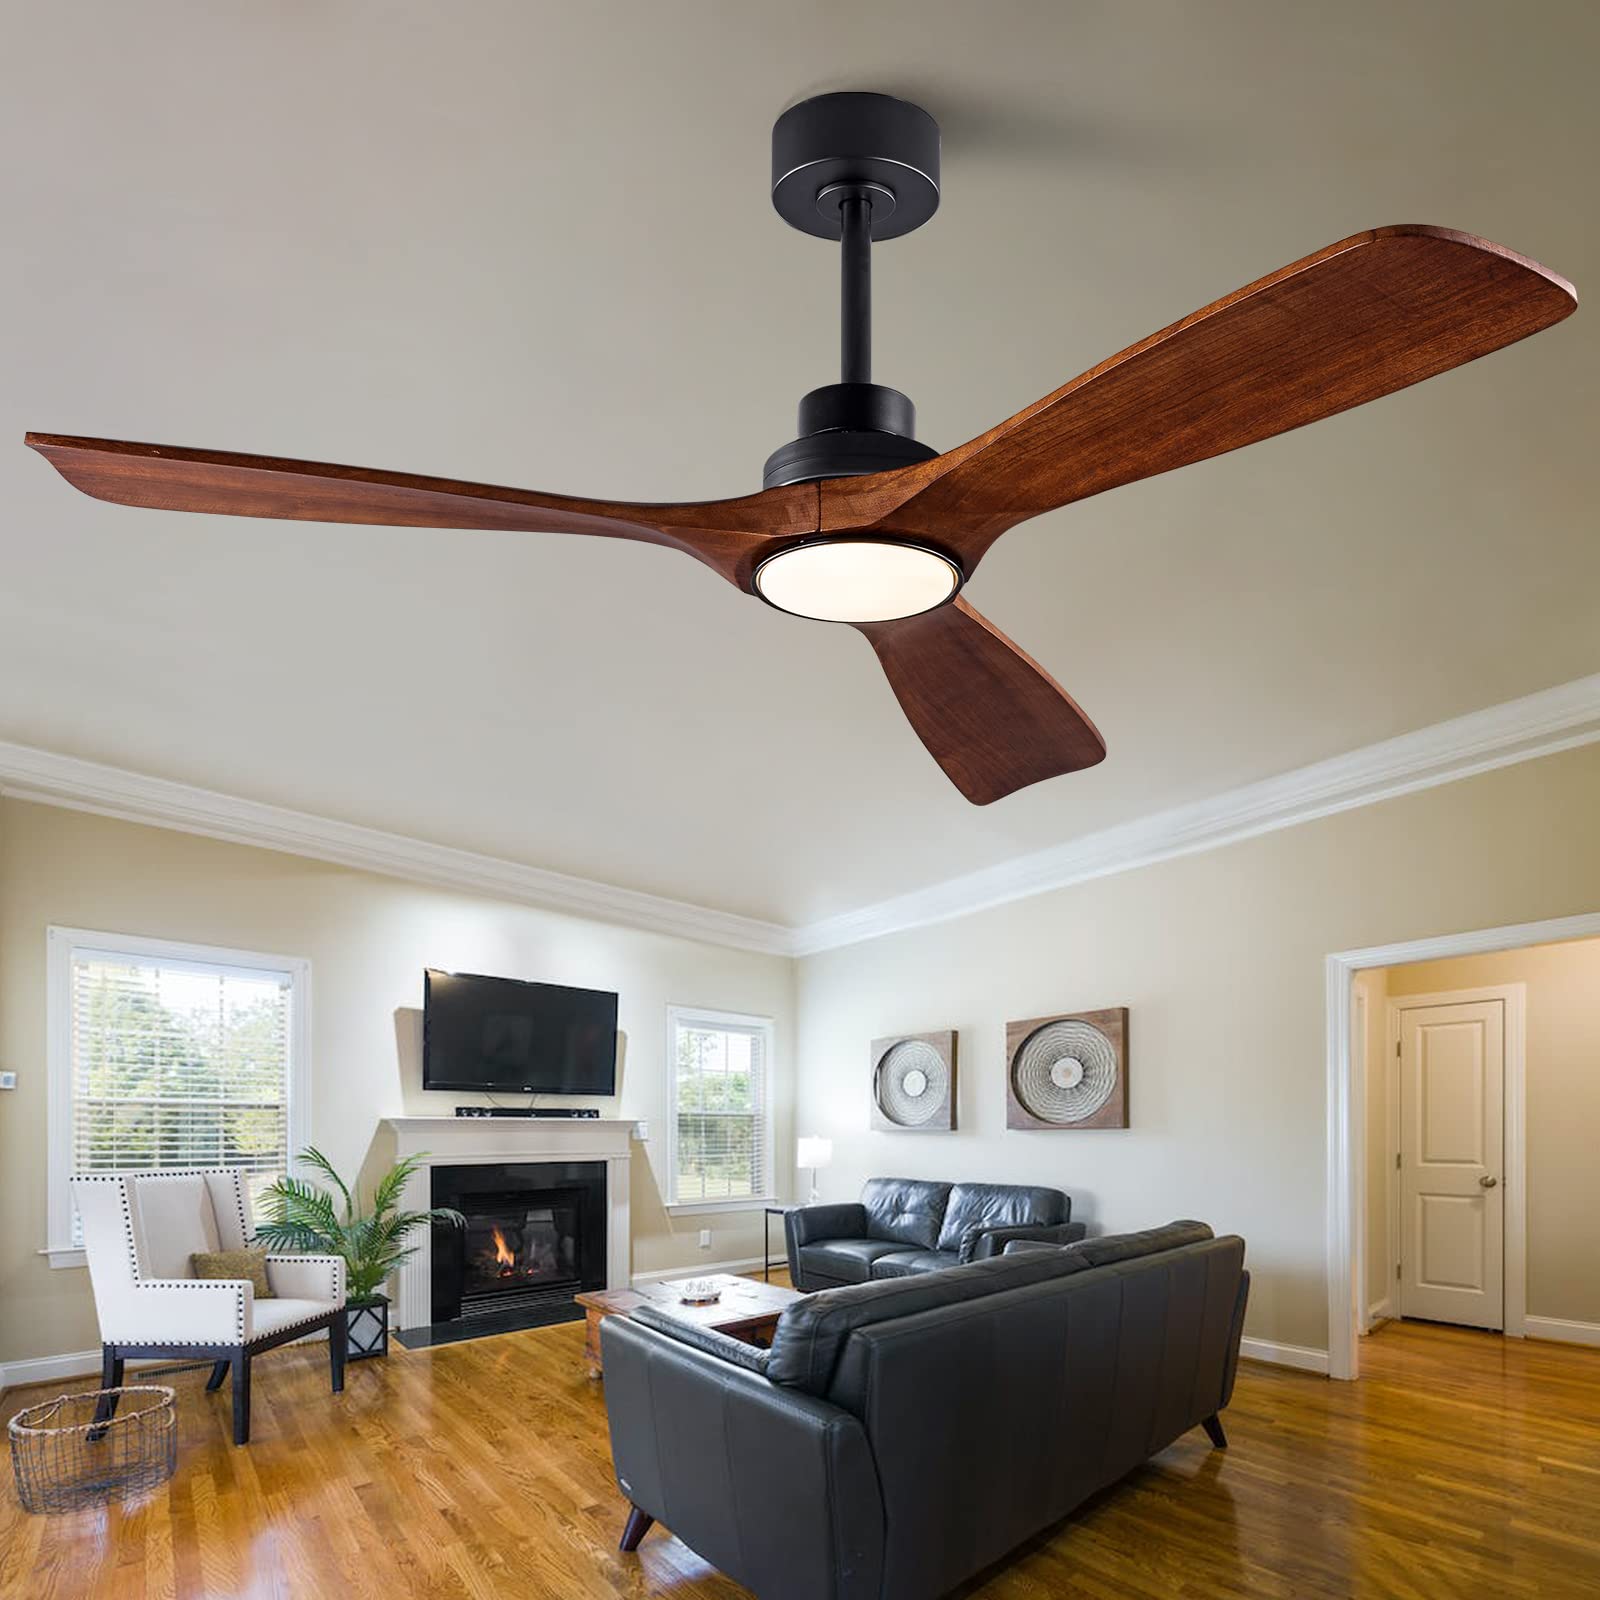 QUTWOB 52" Wood Ceiling Fan with Lights Remote Control